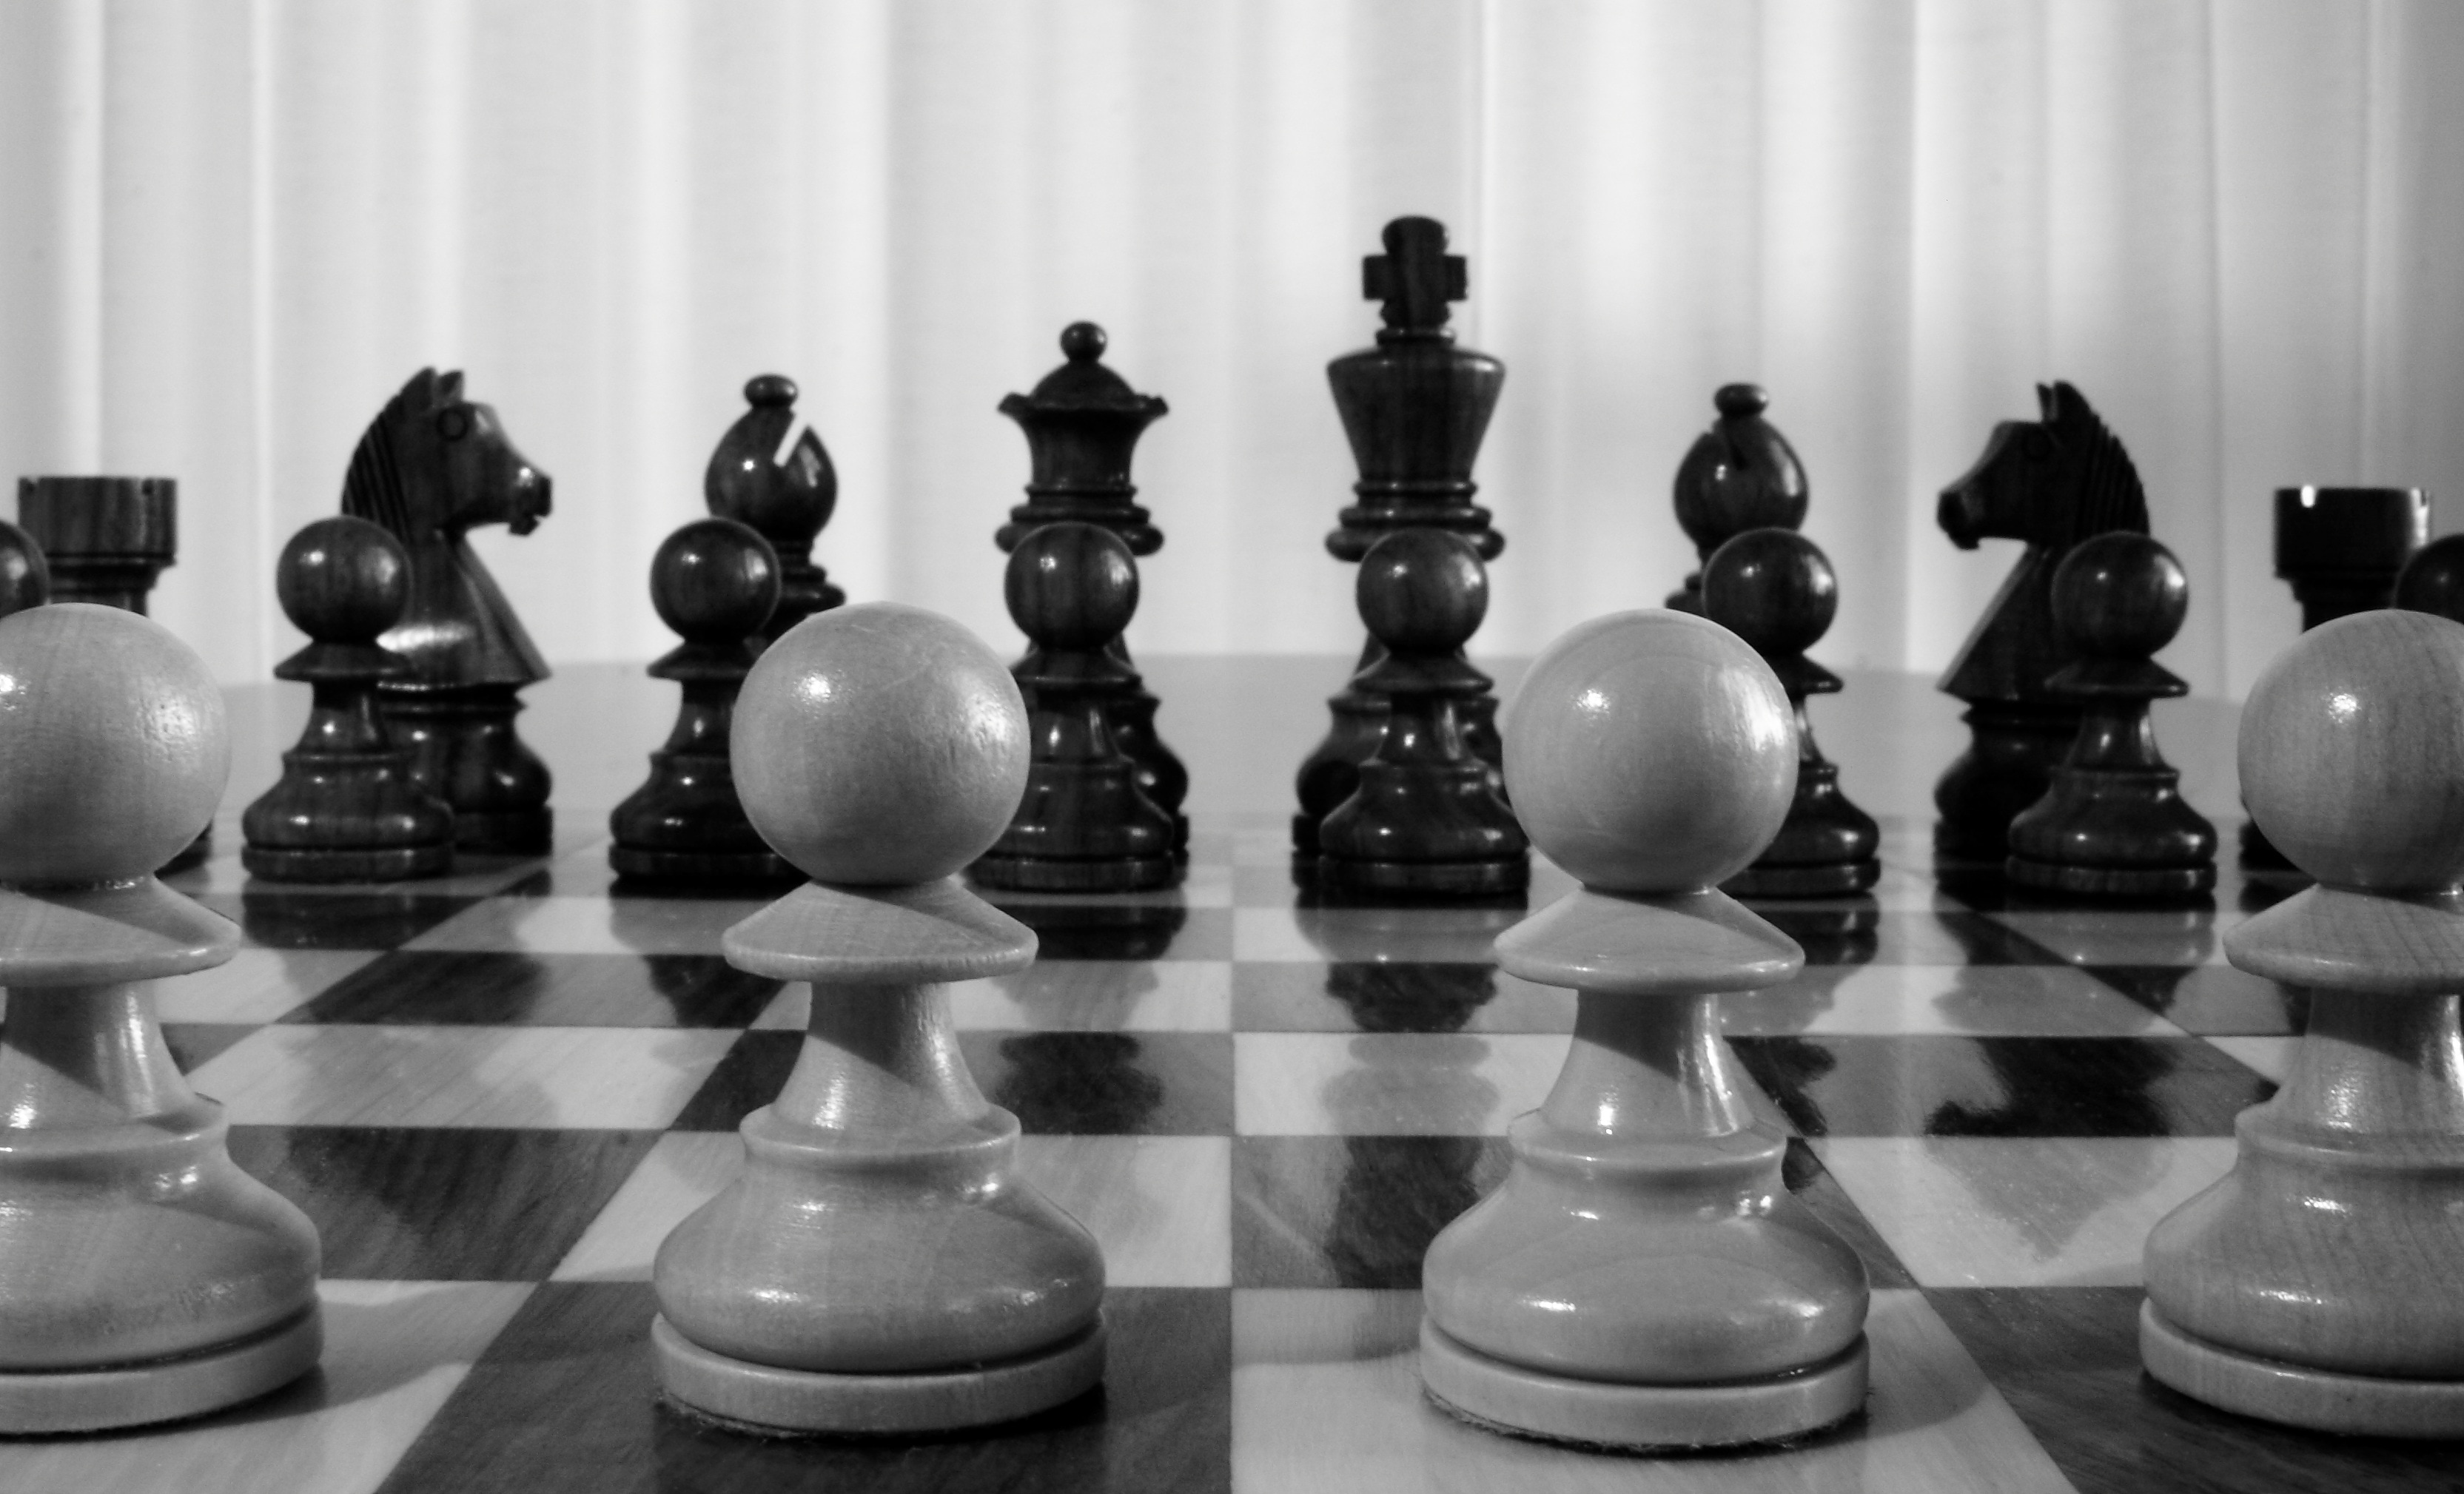 grayscale photo of white chess pawns in front of black chess pieces on chessboard